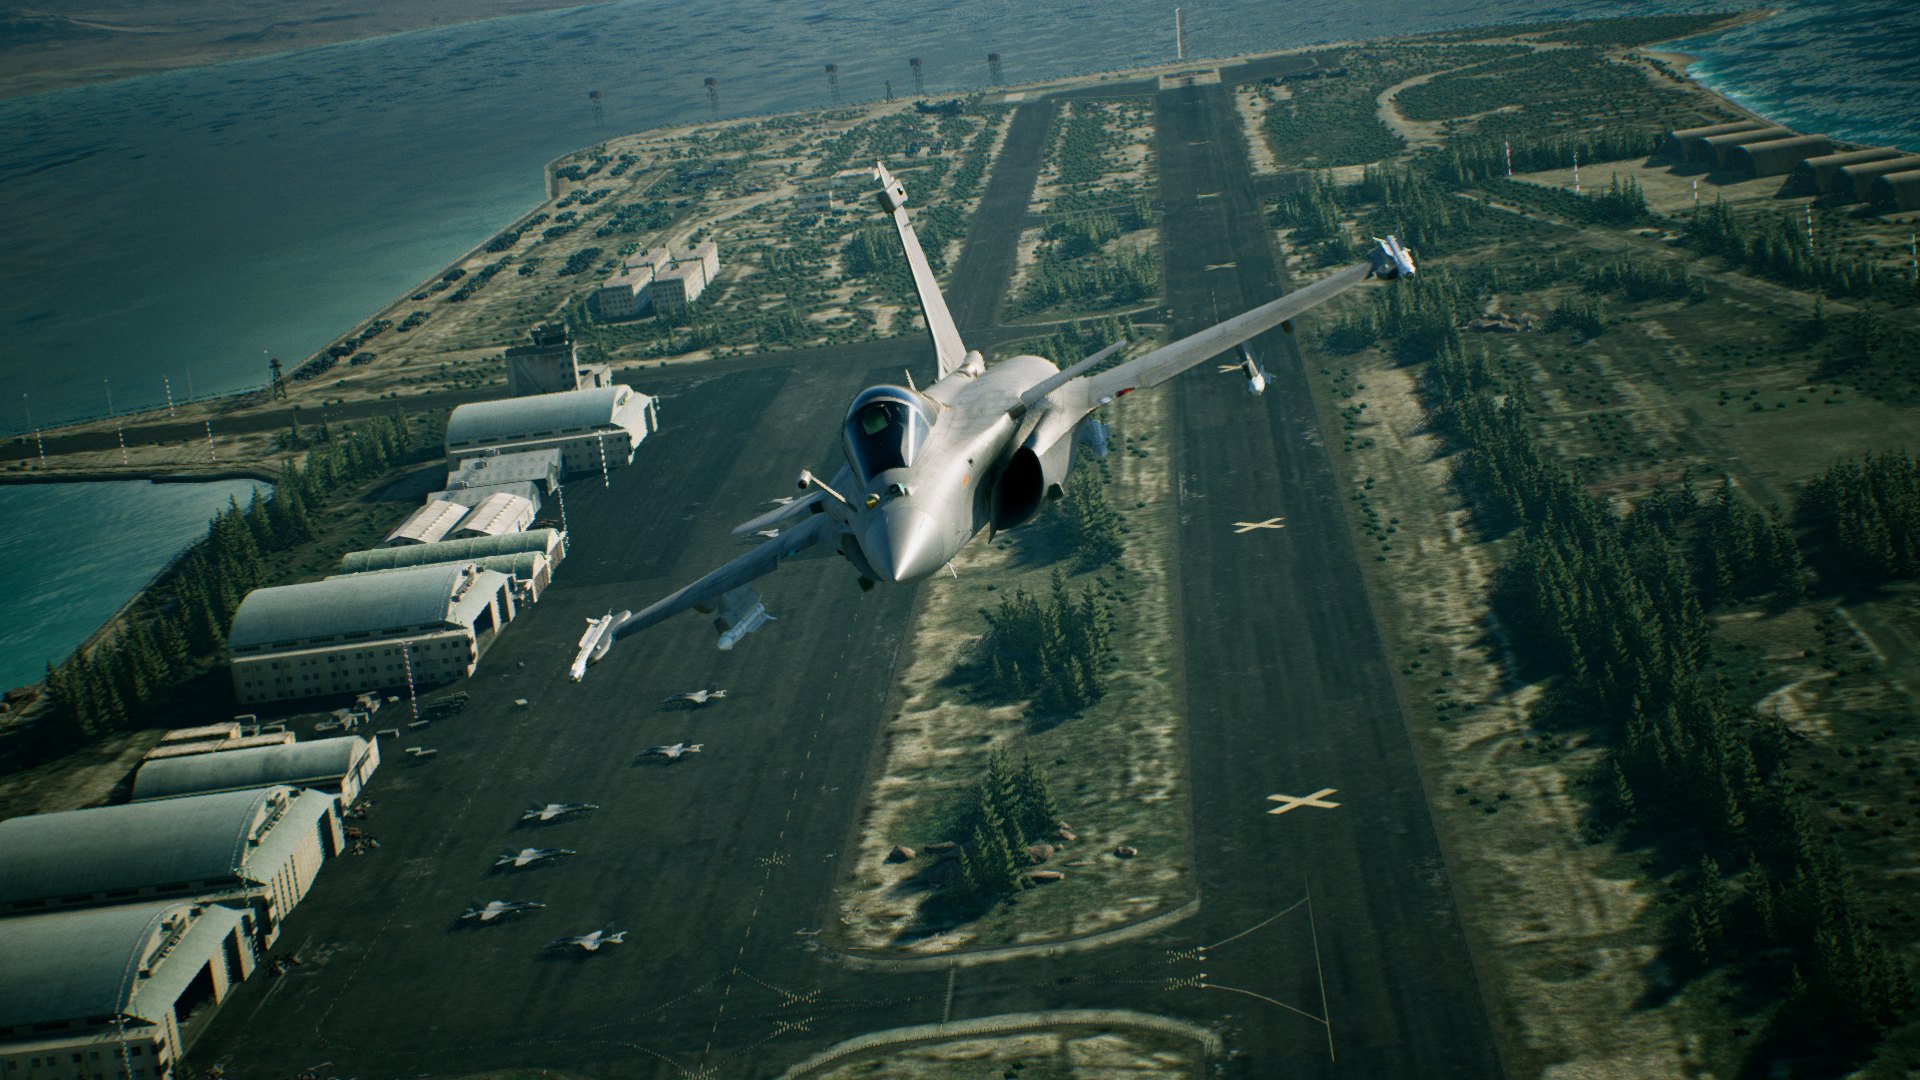 ACE COMBAT 7: SKIES UNKNOWN PlayStation 4 Account